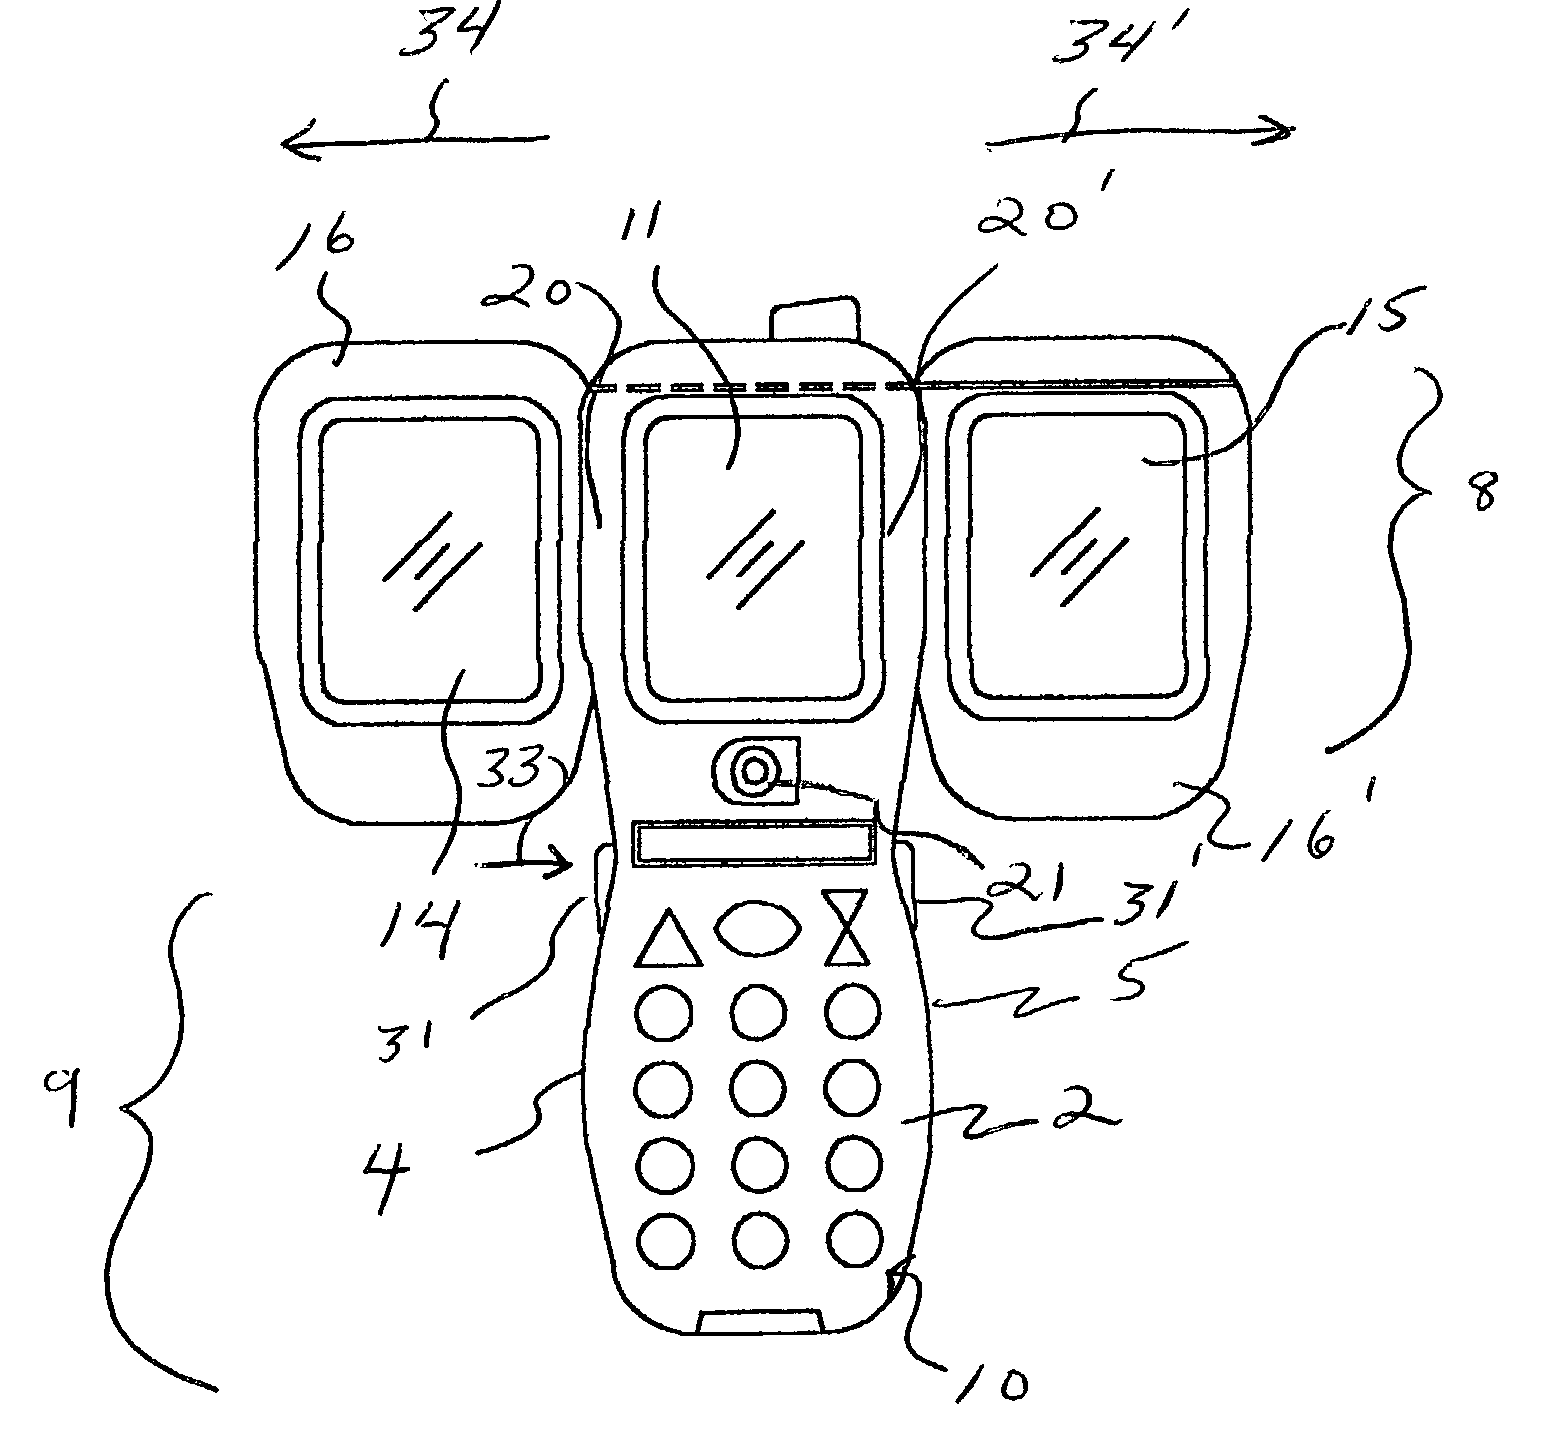 Wireless mobile device